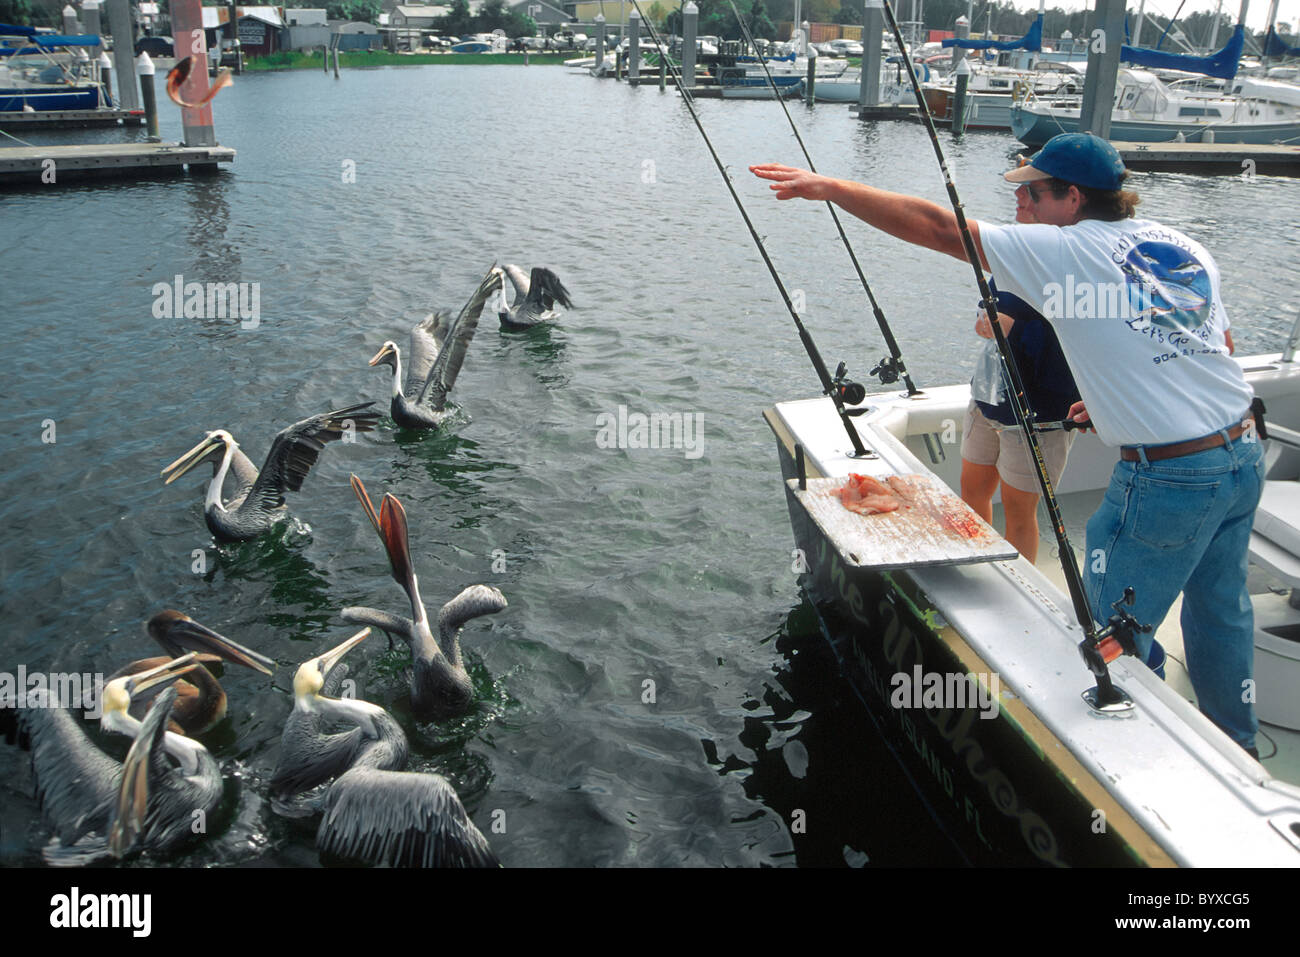 feeding the pelicans while cleaning day's catch from back of fishing boat at marina on Amelia Island Florida Stock Photo